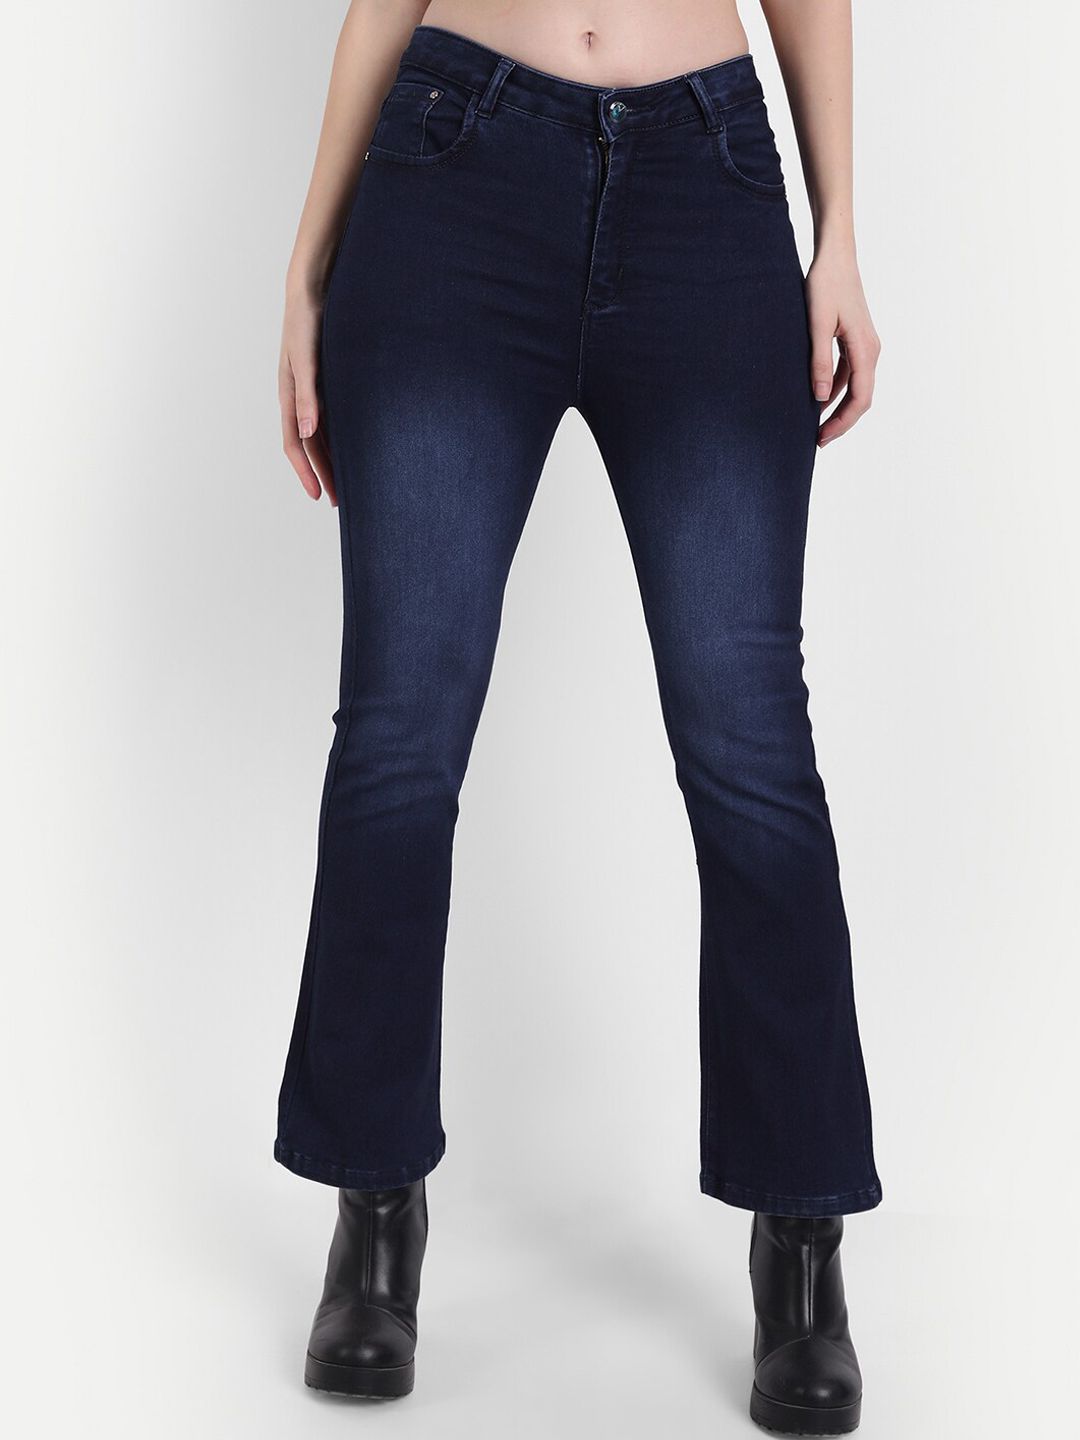 Next One Women Navy Blue Bootcut High-Rise Light Fade Stretchable Cotton Jeans Price in India